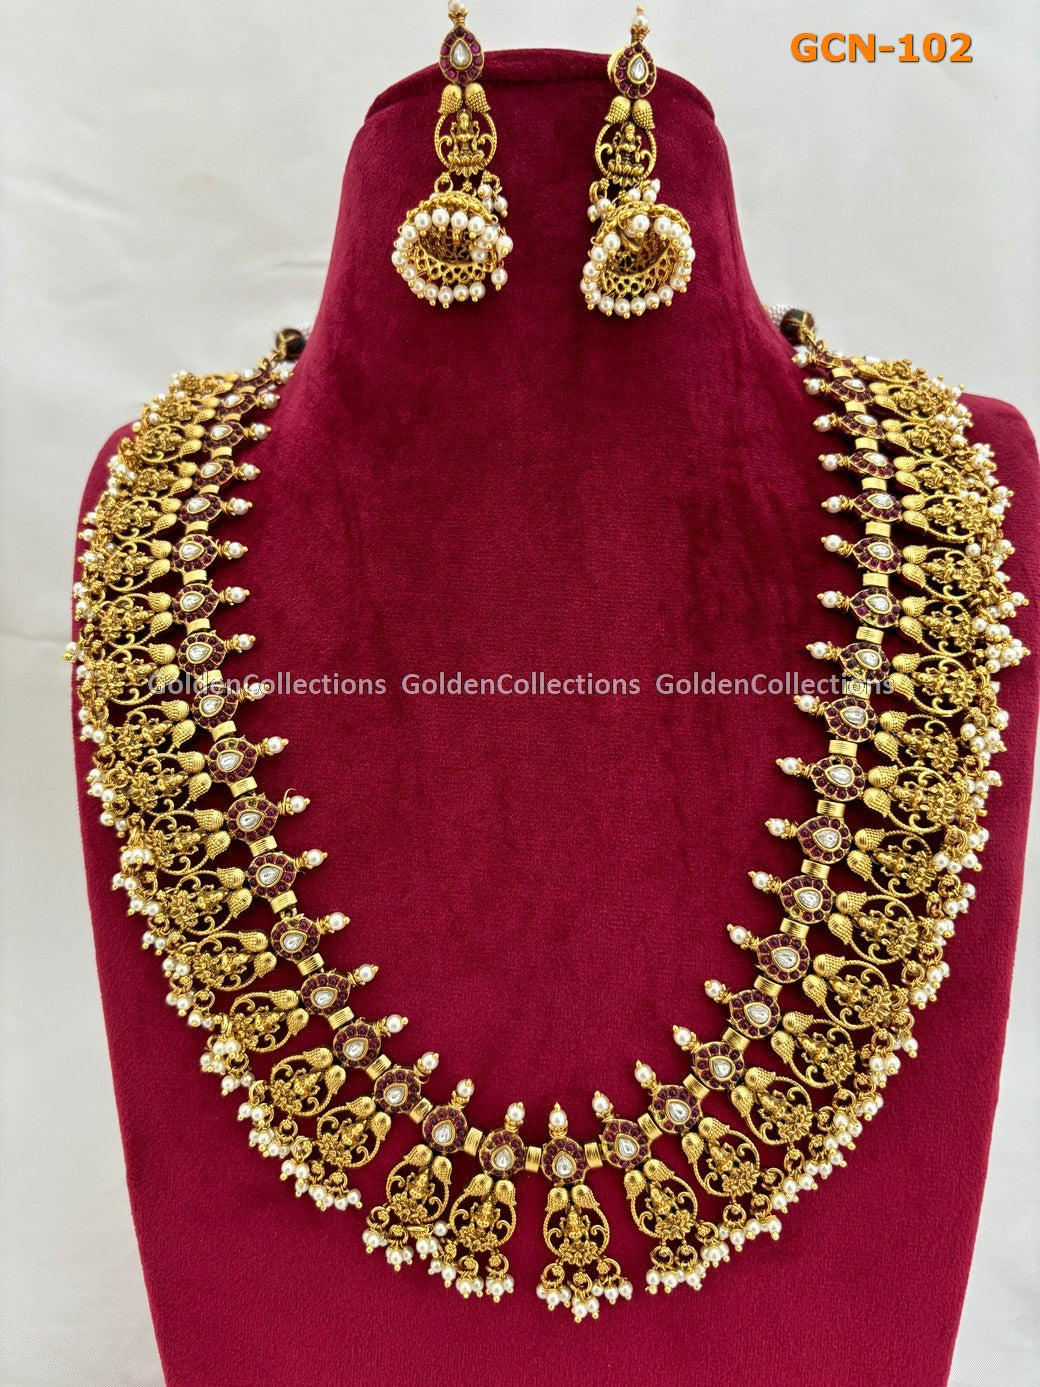 Long Necklace Design South Indian : Jewellery Design Set GoldenCollections 